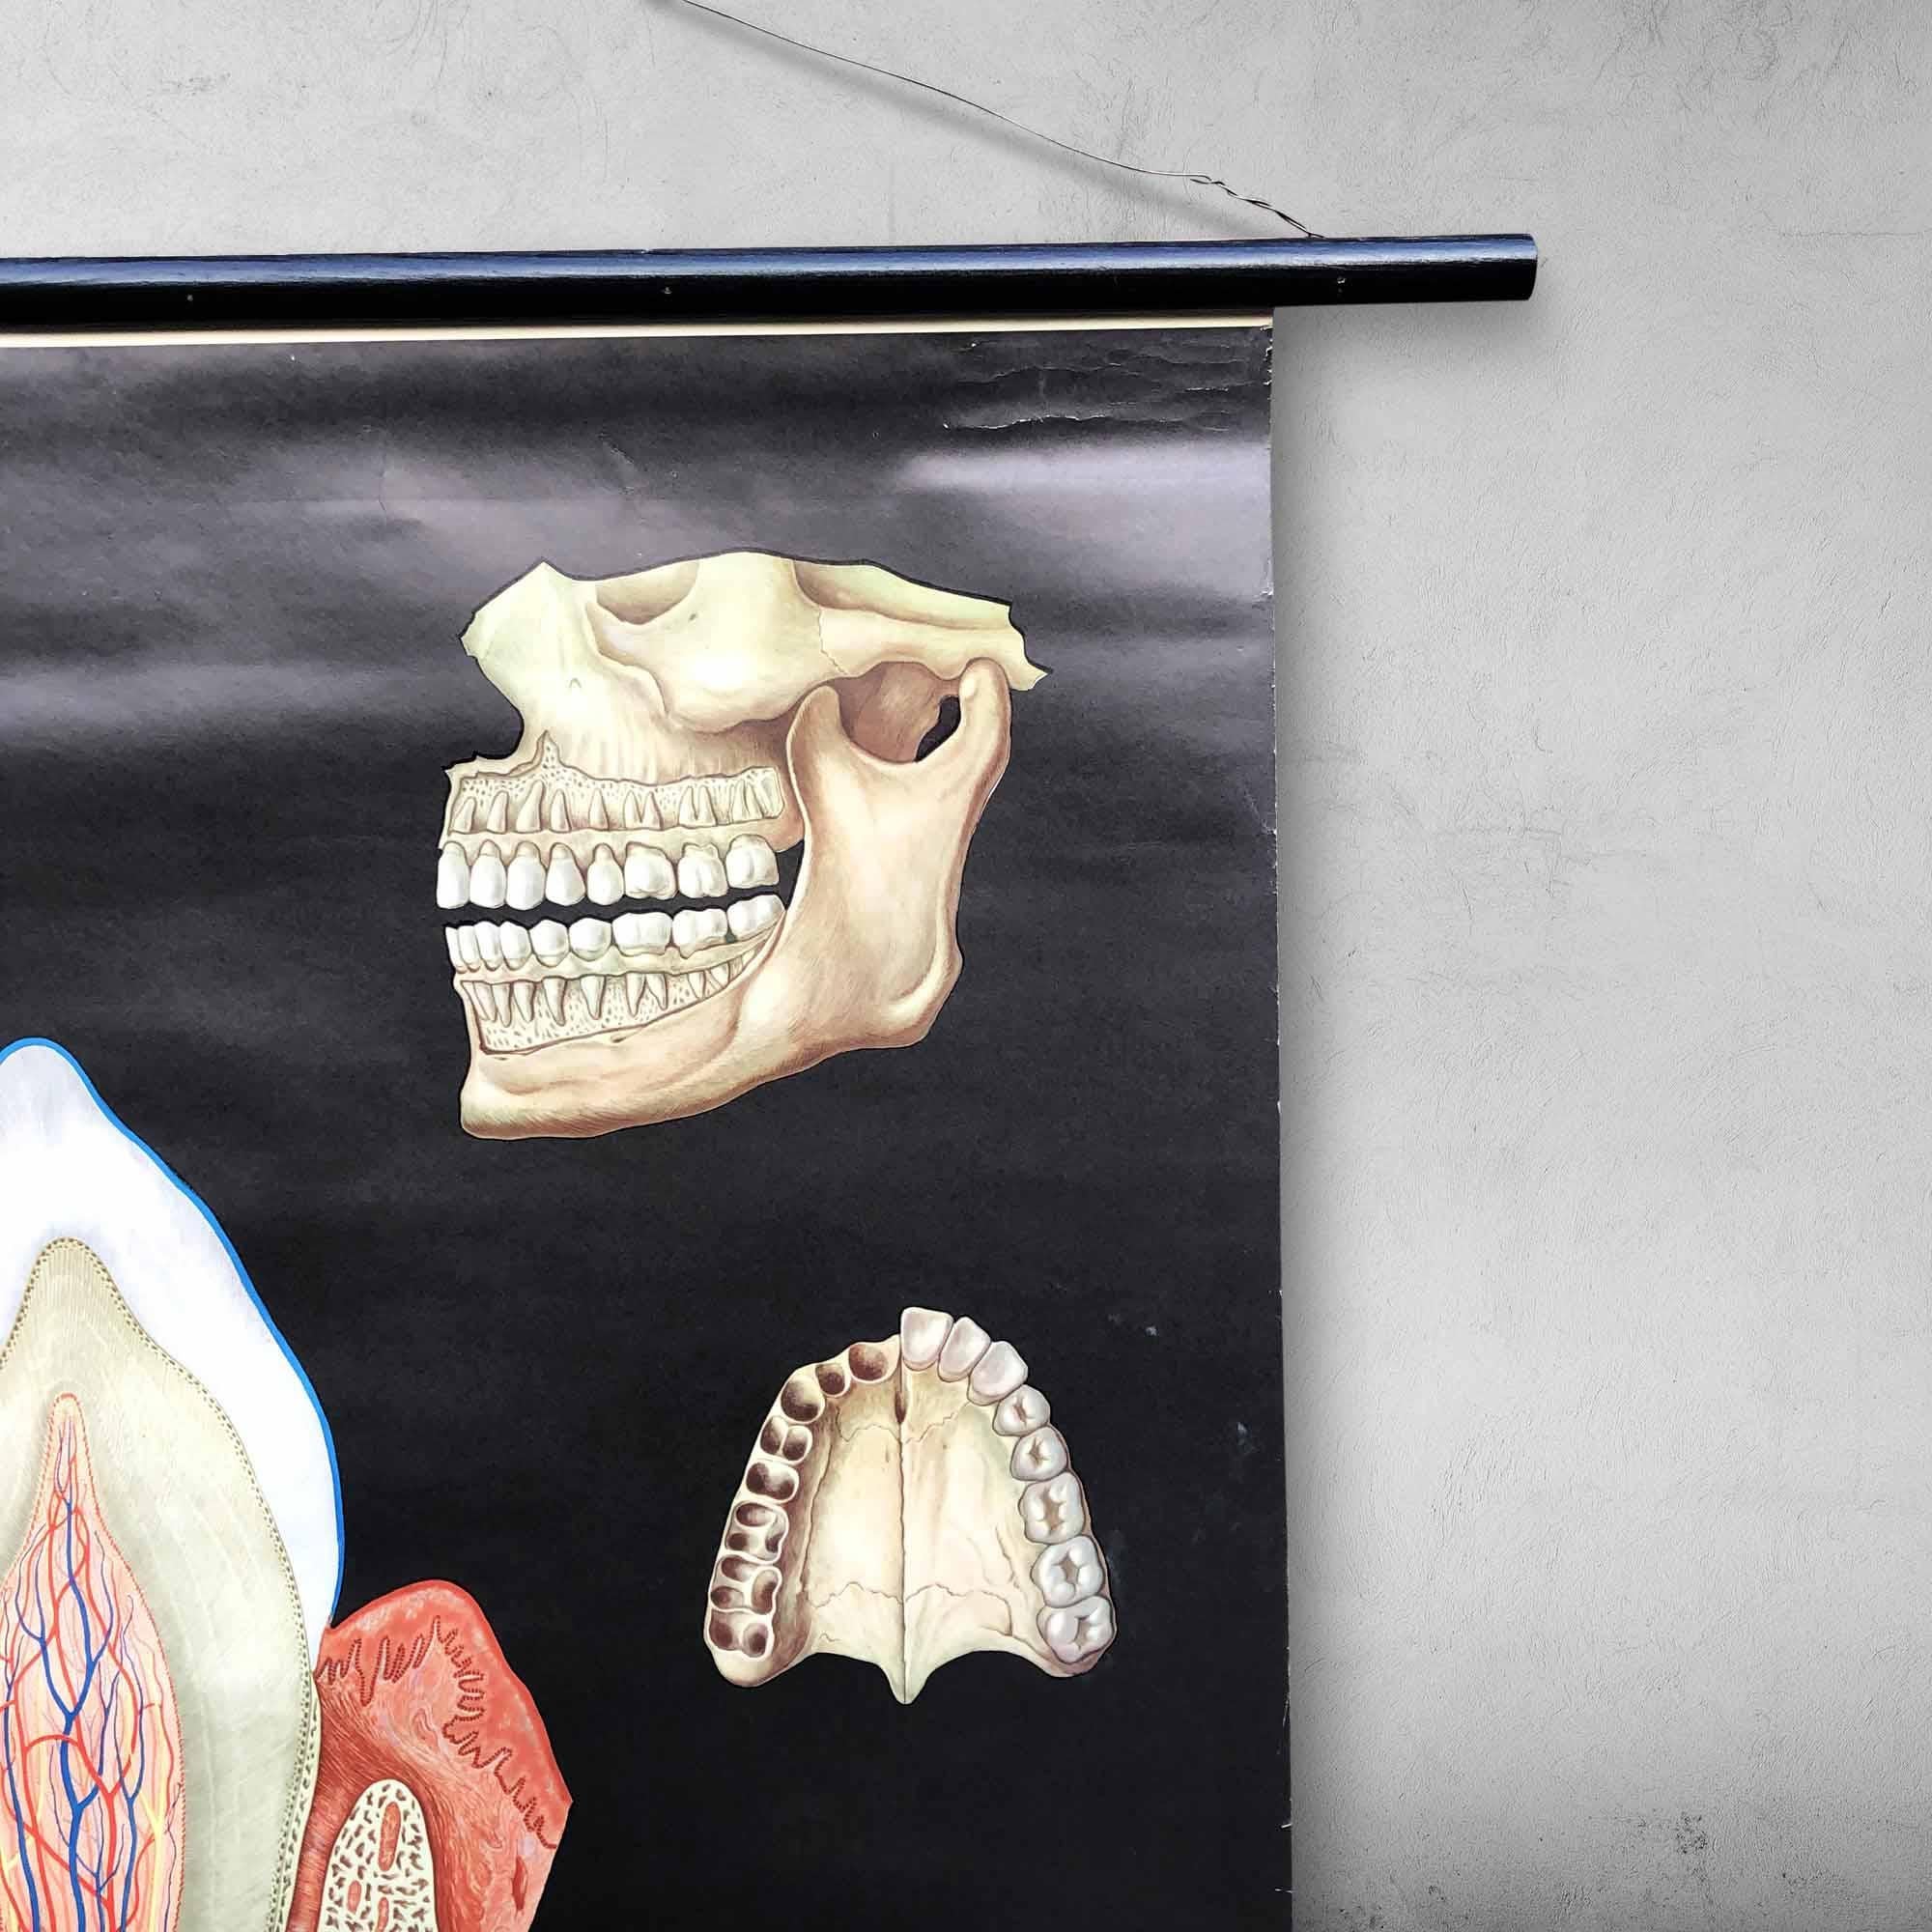 An original German vintage wall chart about human teeth.
The text on the map is in German and it was used for teaching purposes. It has a splendid design, detailed drawings, and beautiful deep colors.

Ideal for a dentist's office!

This